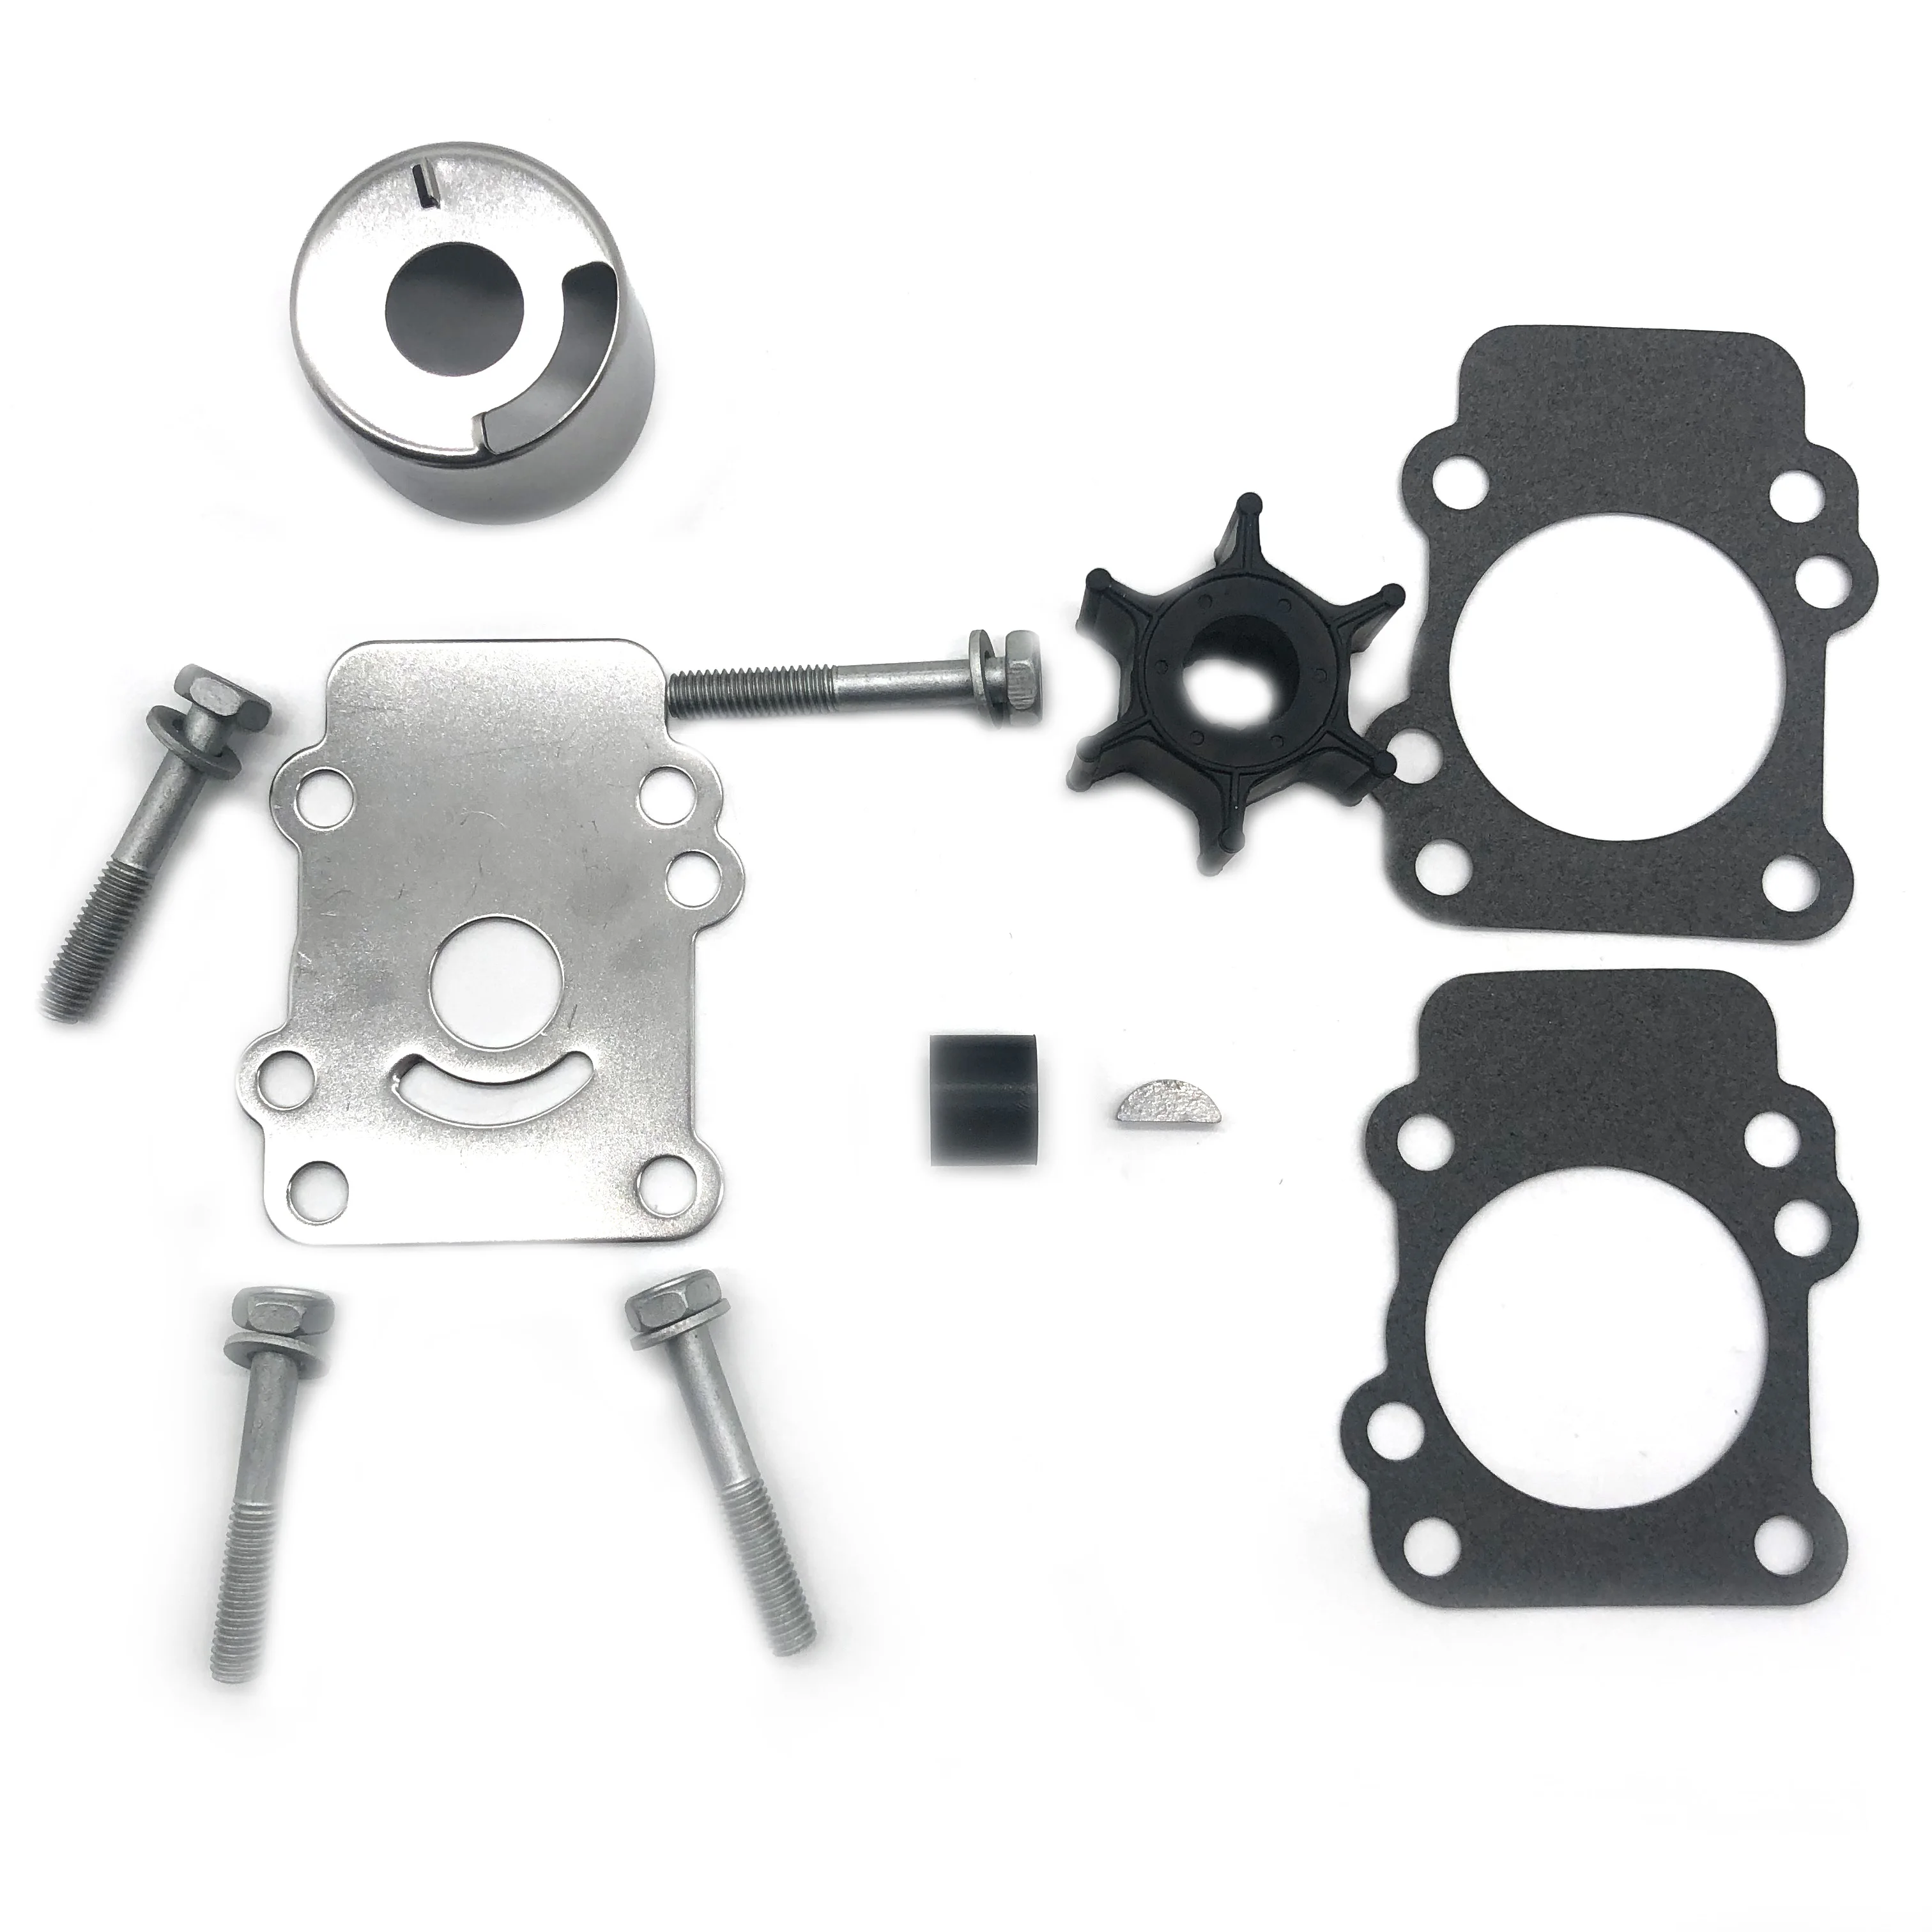 water-pump-impeller-repair-kit-for-yamaha-outboard-682-w0078-a1-00-682-w0078-00-00-682-w0078-01-00-18-3148